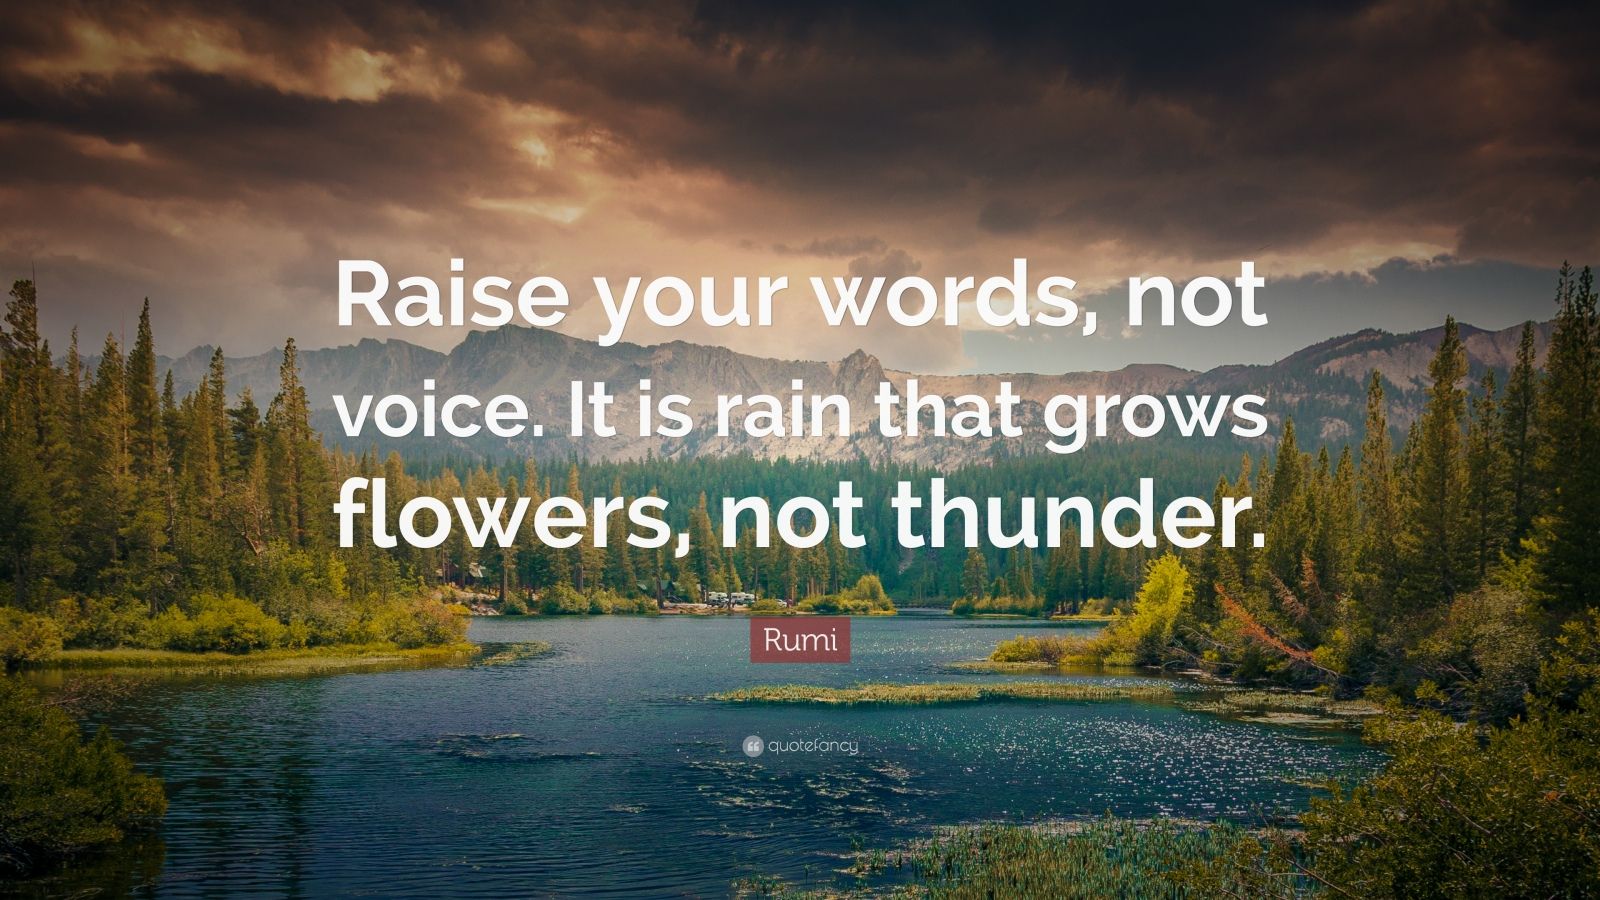 Rumi Quote: “Raise your words, not voice. It is rain that grows flowers